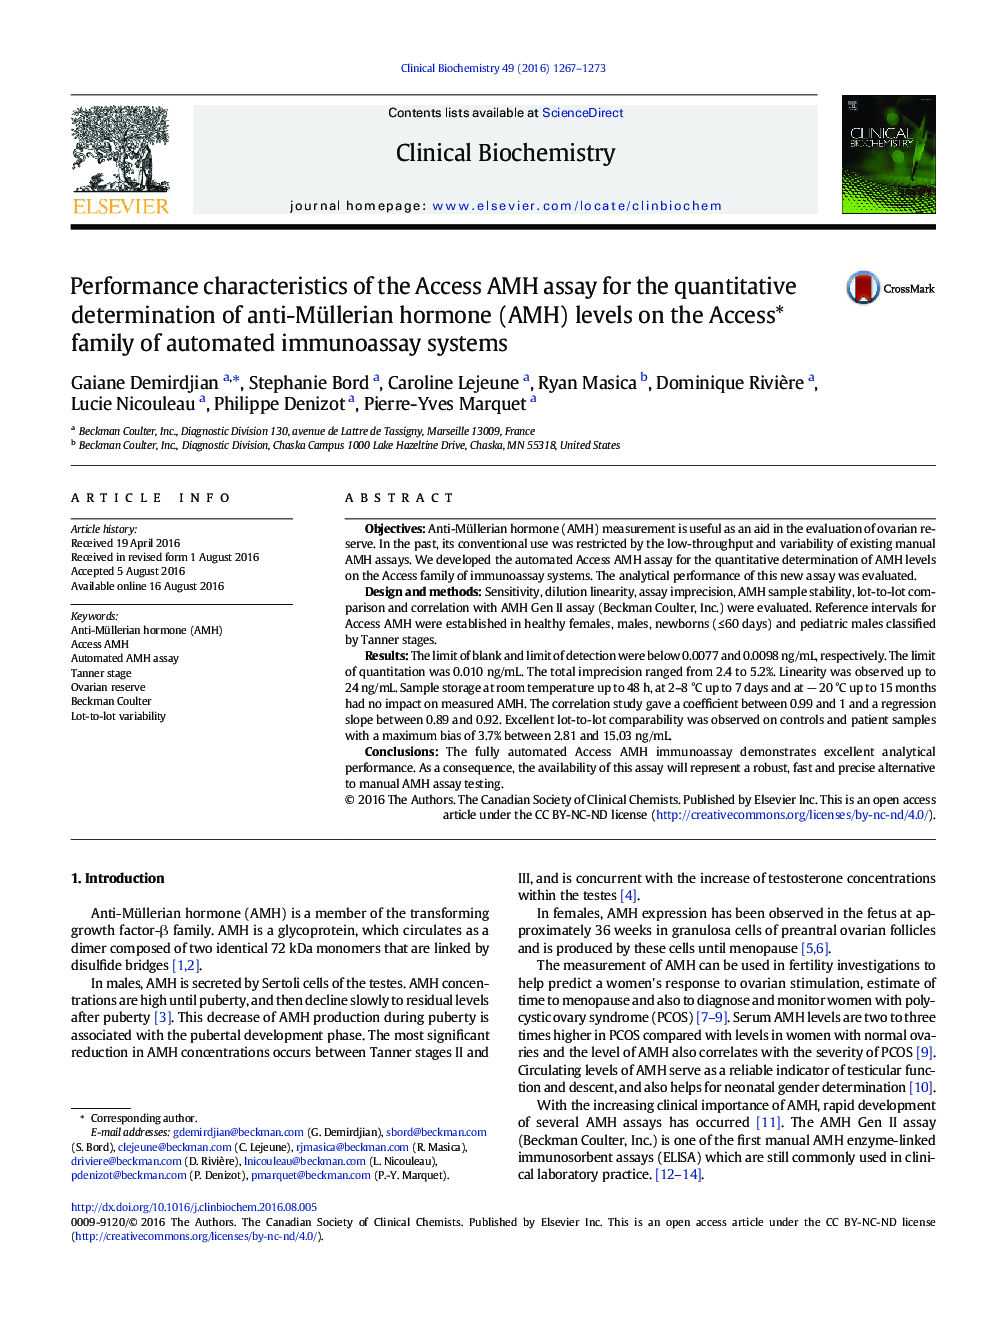 Performance characteristics of the Access AMH assay for the quantitative determination of anti-Müllerian hormone (AMH) levels on the Access* family of automated immunoassay systems